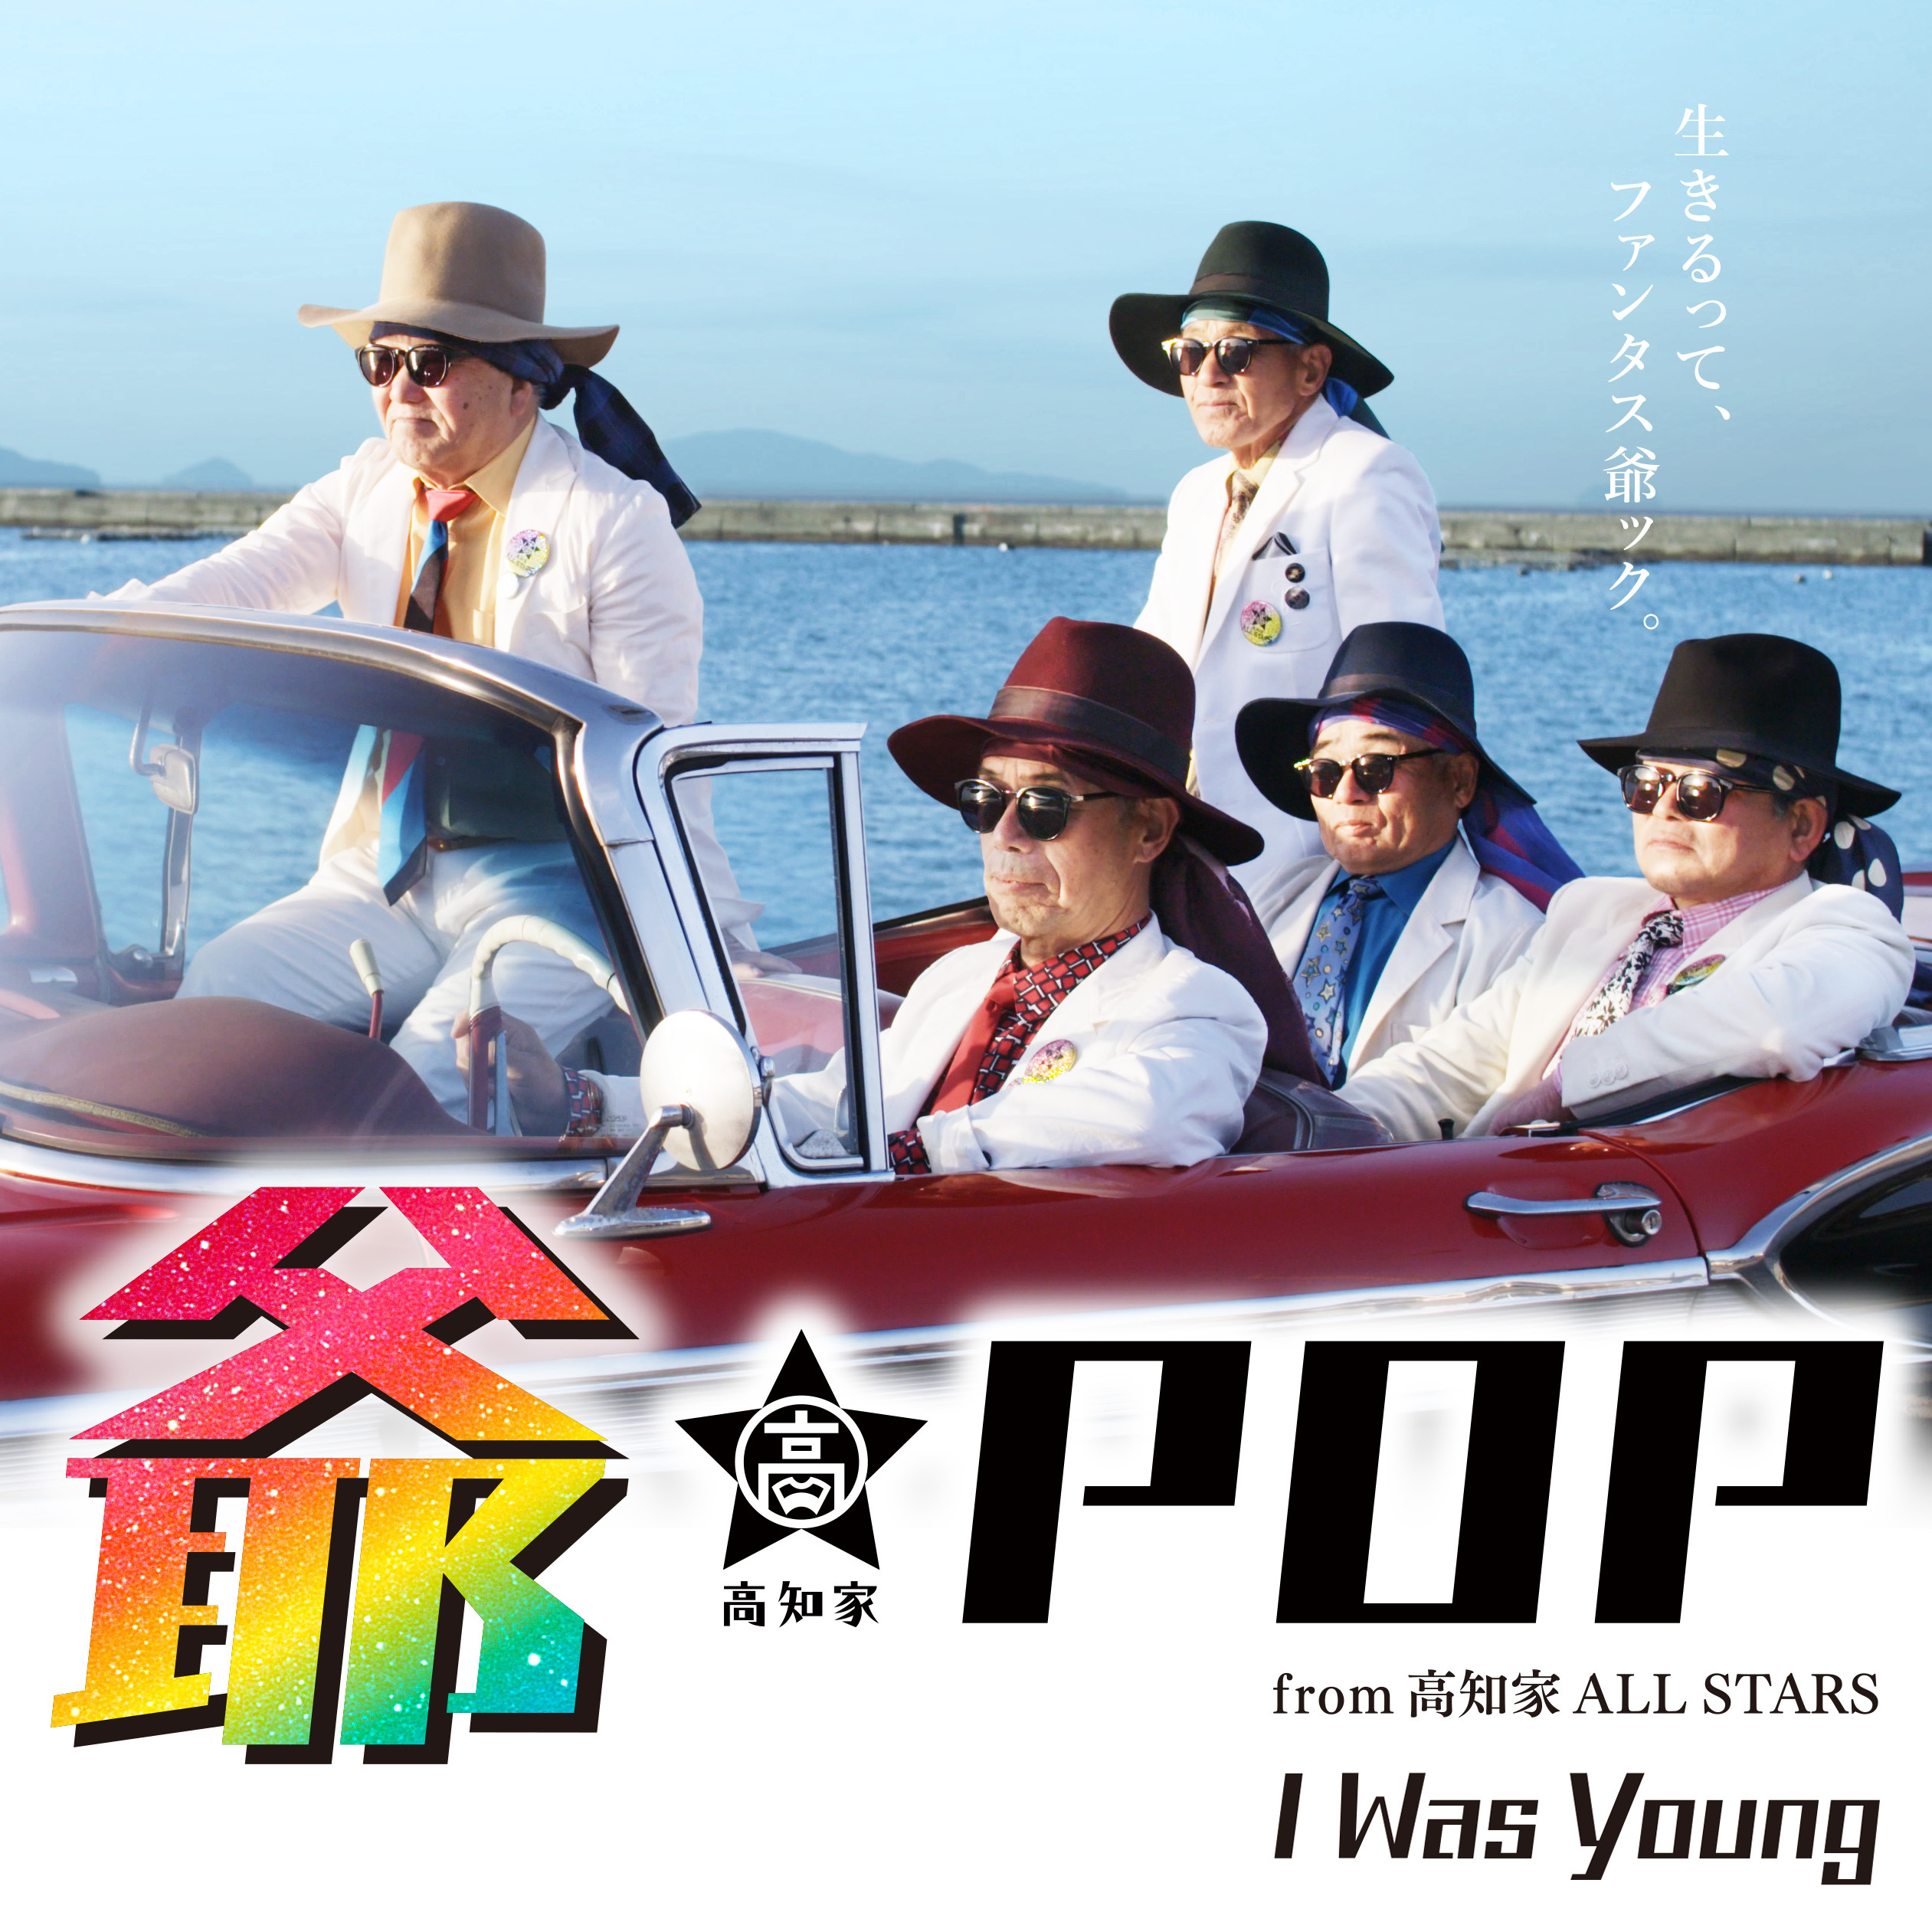 Average 68 2 Years Old Total Age Of 341 Grandpa Idol Group From Kochi G Pop From Kochi Ke All Stars Releases Music Video For New All English Song I Was Young Business Wire